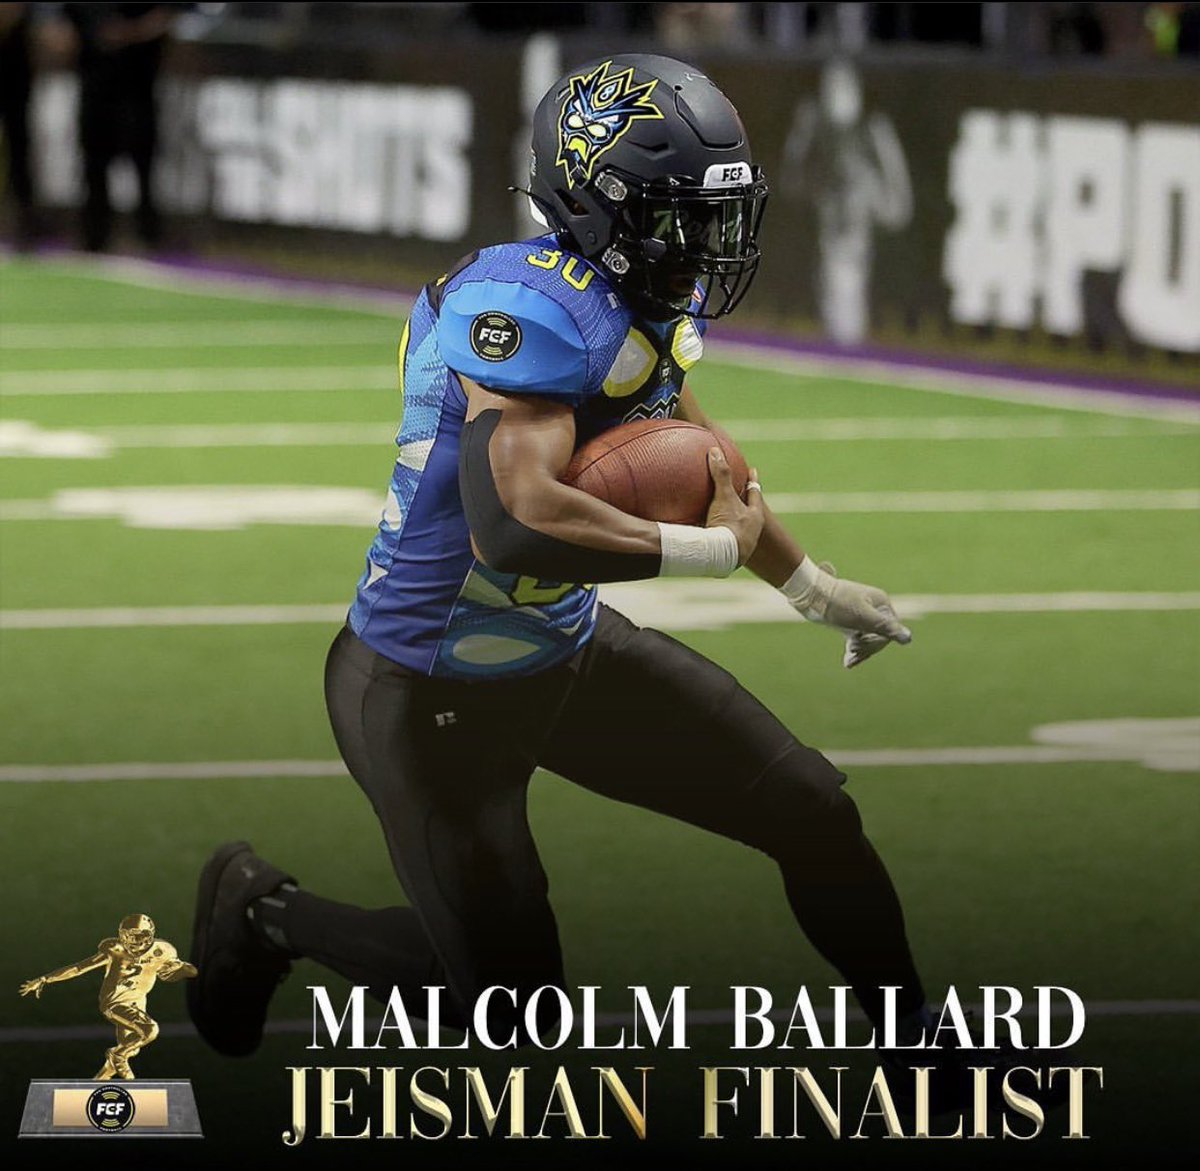 STOP WHAT YOURE DOING ‼️ Head over yo the FCF app or download it and go vote for me for the Jeisman Trophy 🏆 The Power is in your hands fans 🙏🏾 @fcflio @fcf8okifc @mtsacfootball